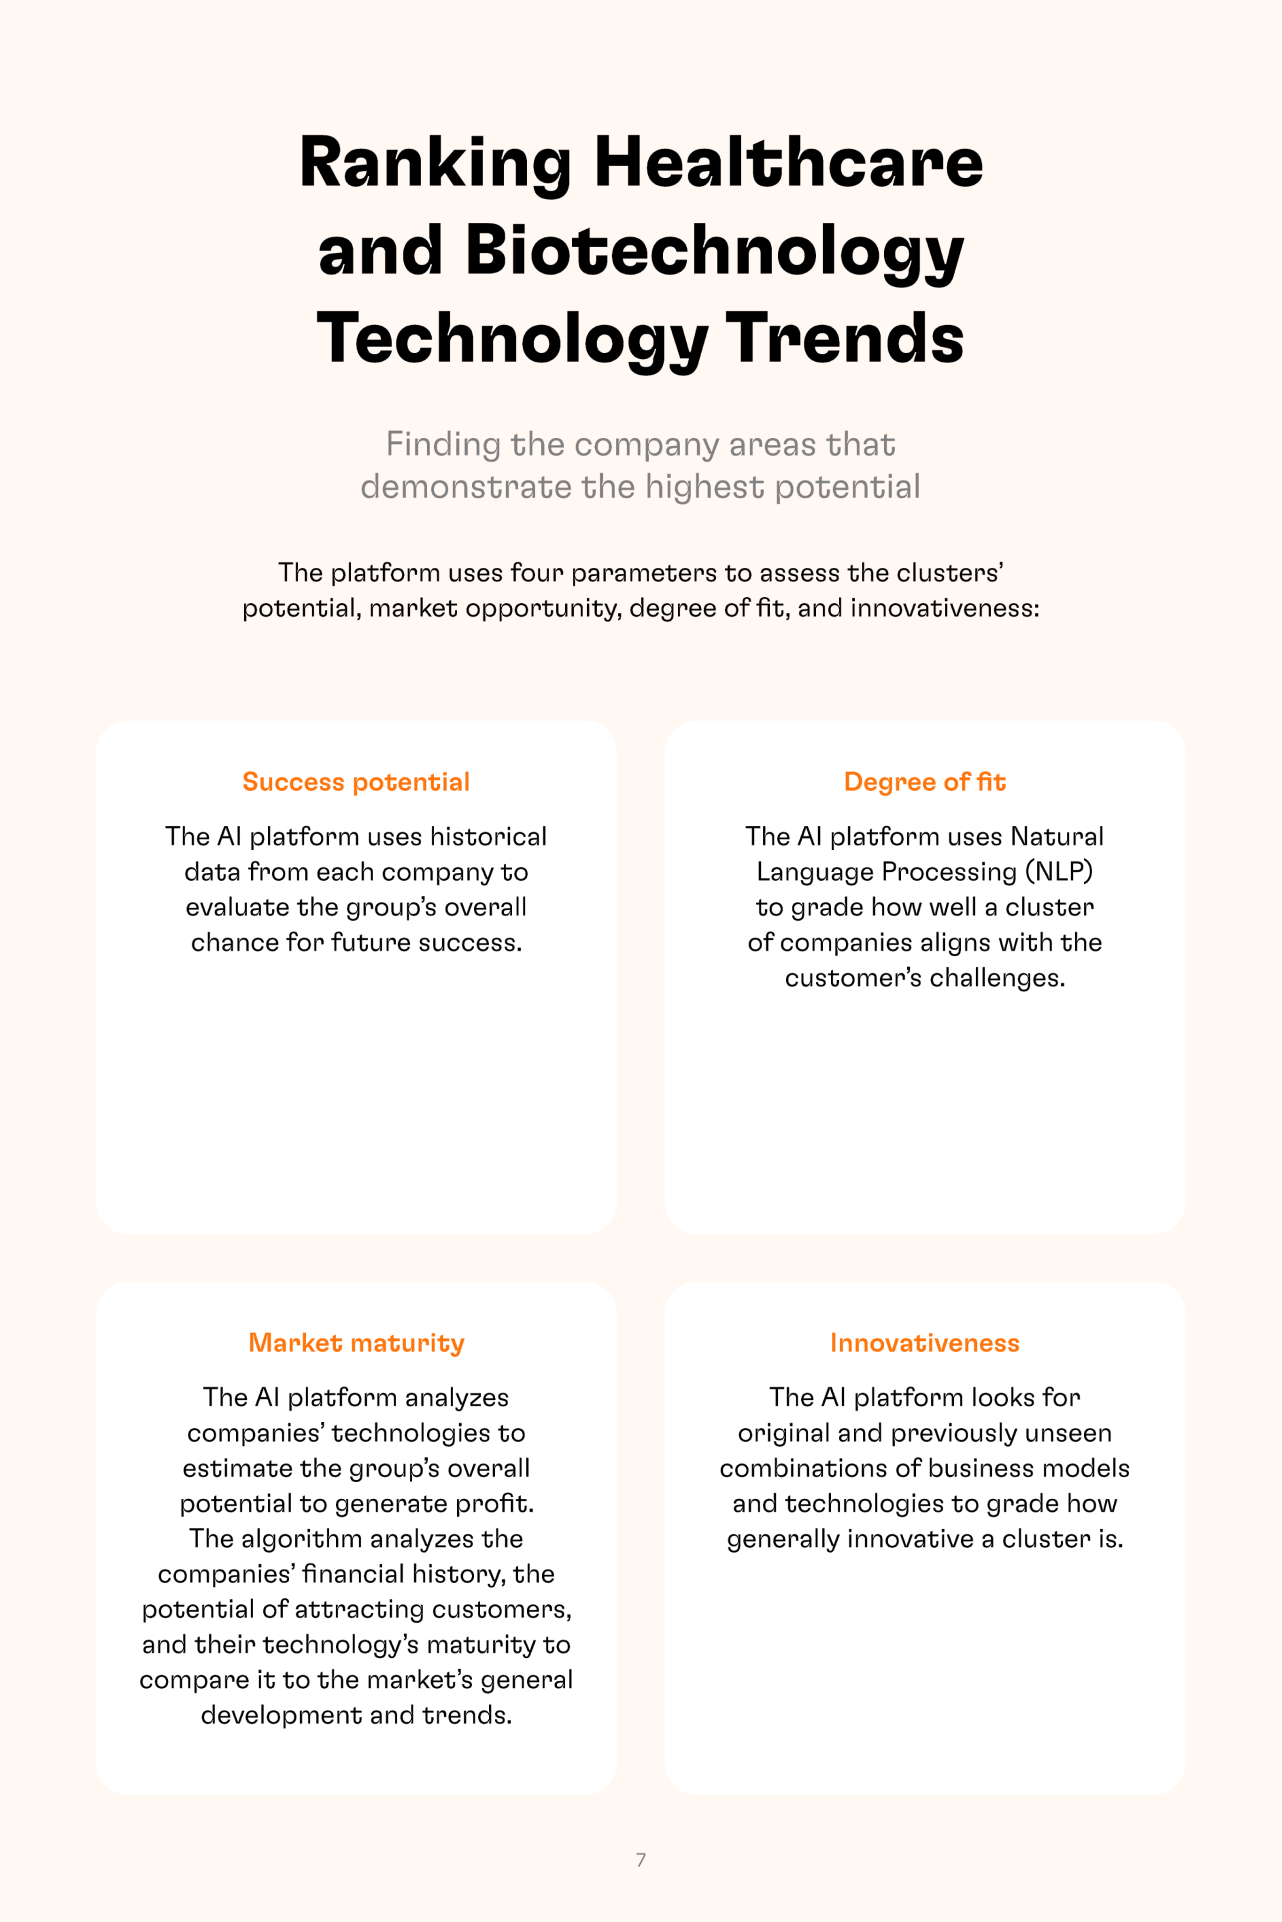 Healthcare and Biotechnology industry insights ranking technology trends